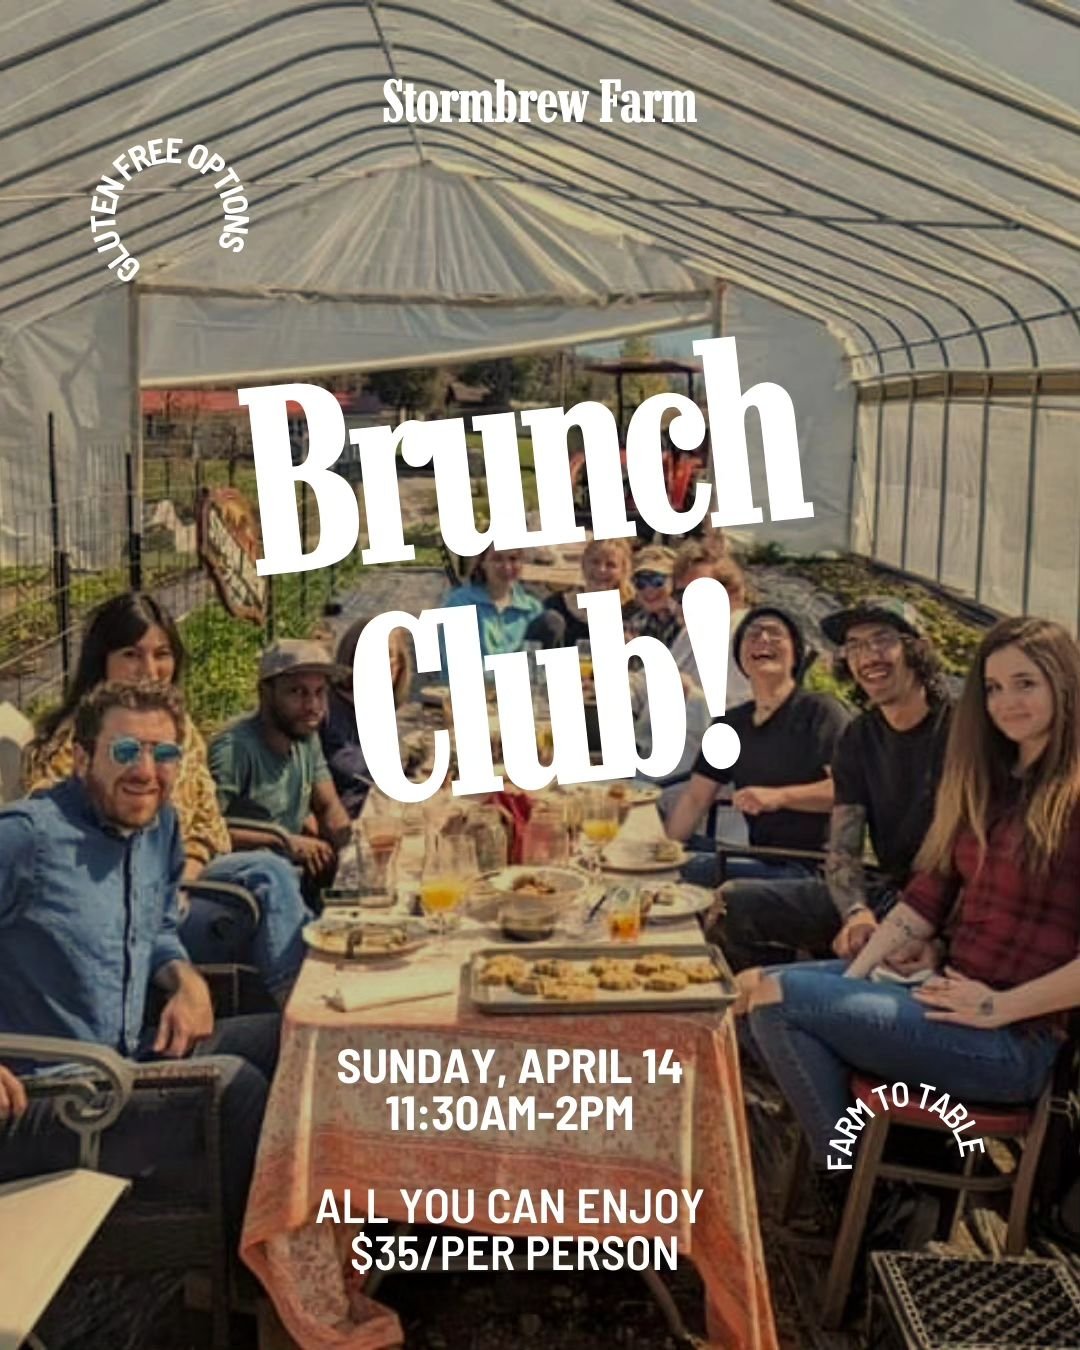 This Sunday, April 14! Join the Brunch Club at Stormbrew Farm.

⚡️$35/person - all you can enjoy
🥬 gluten-free options
🌞 indoor &amp; outdoor seating
💌RSVP required

Let us know you're coming by securing a ticket through Humanitix here: https://ev